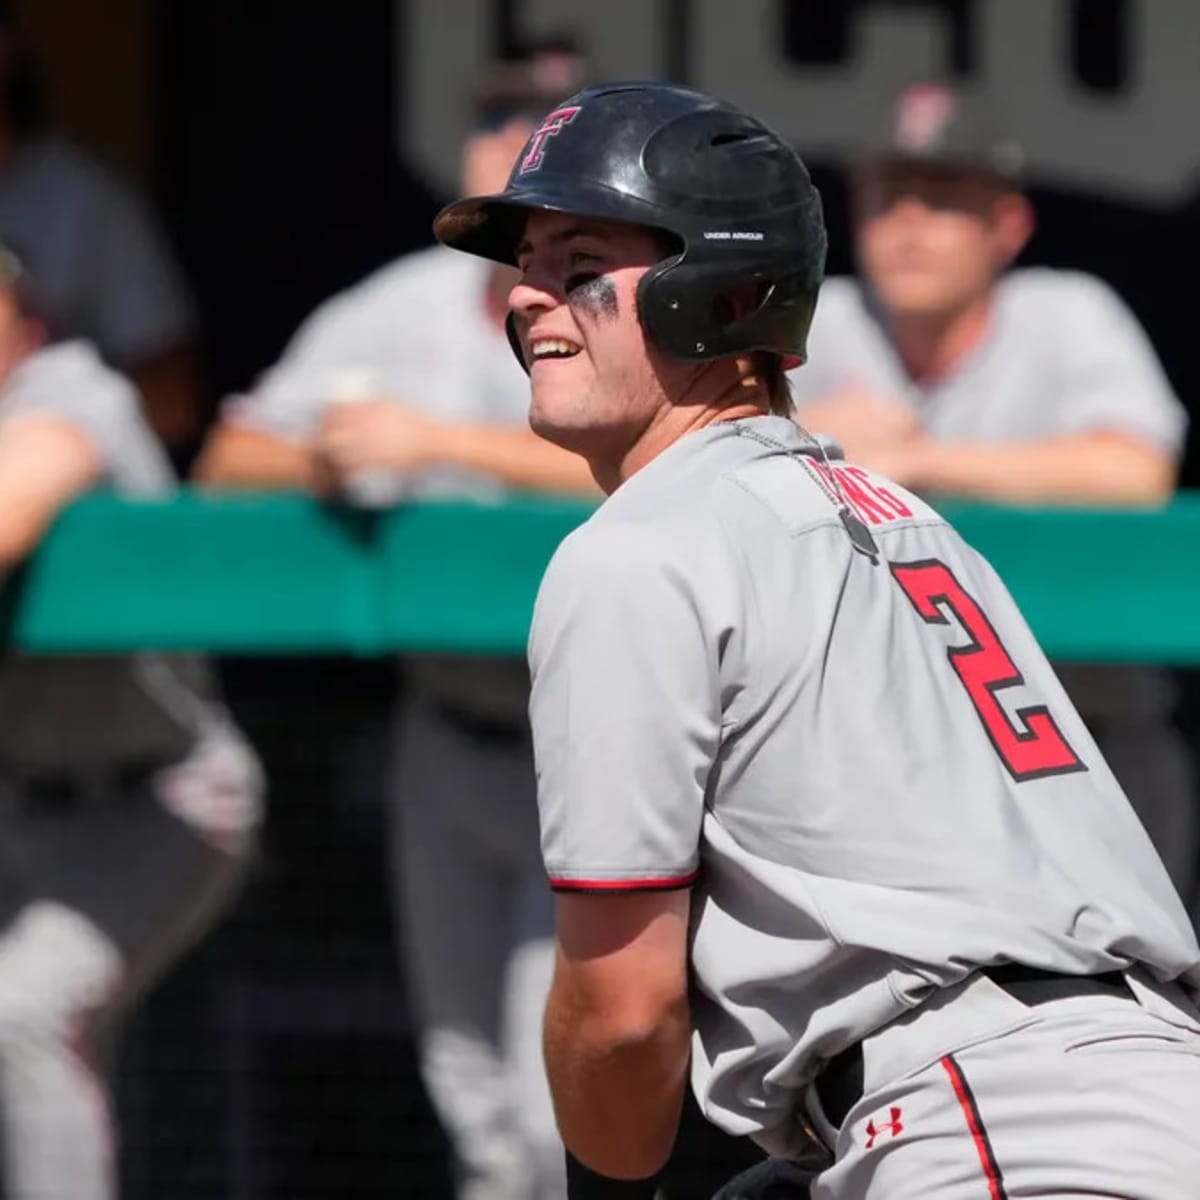 Texas Tech's Jace Jung is a top prospect as MLB draft begins